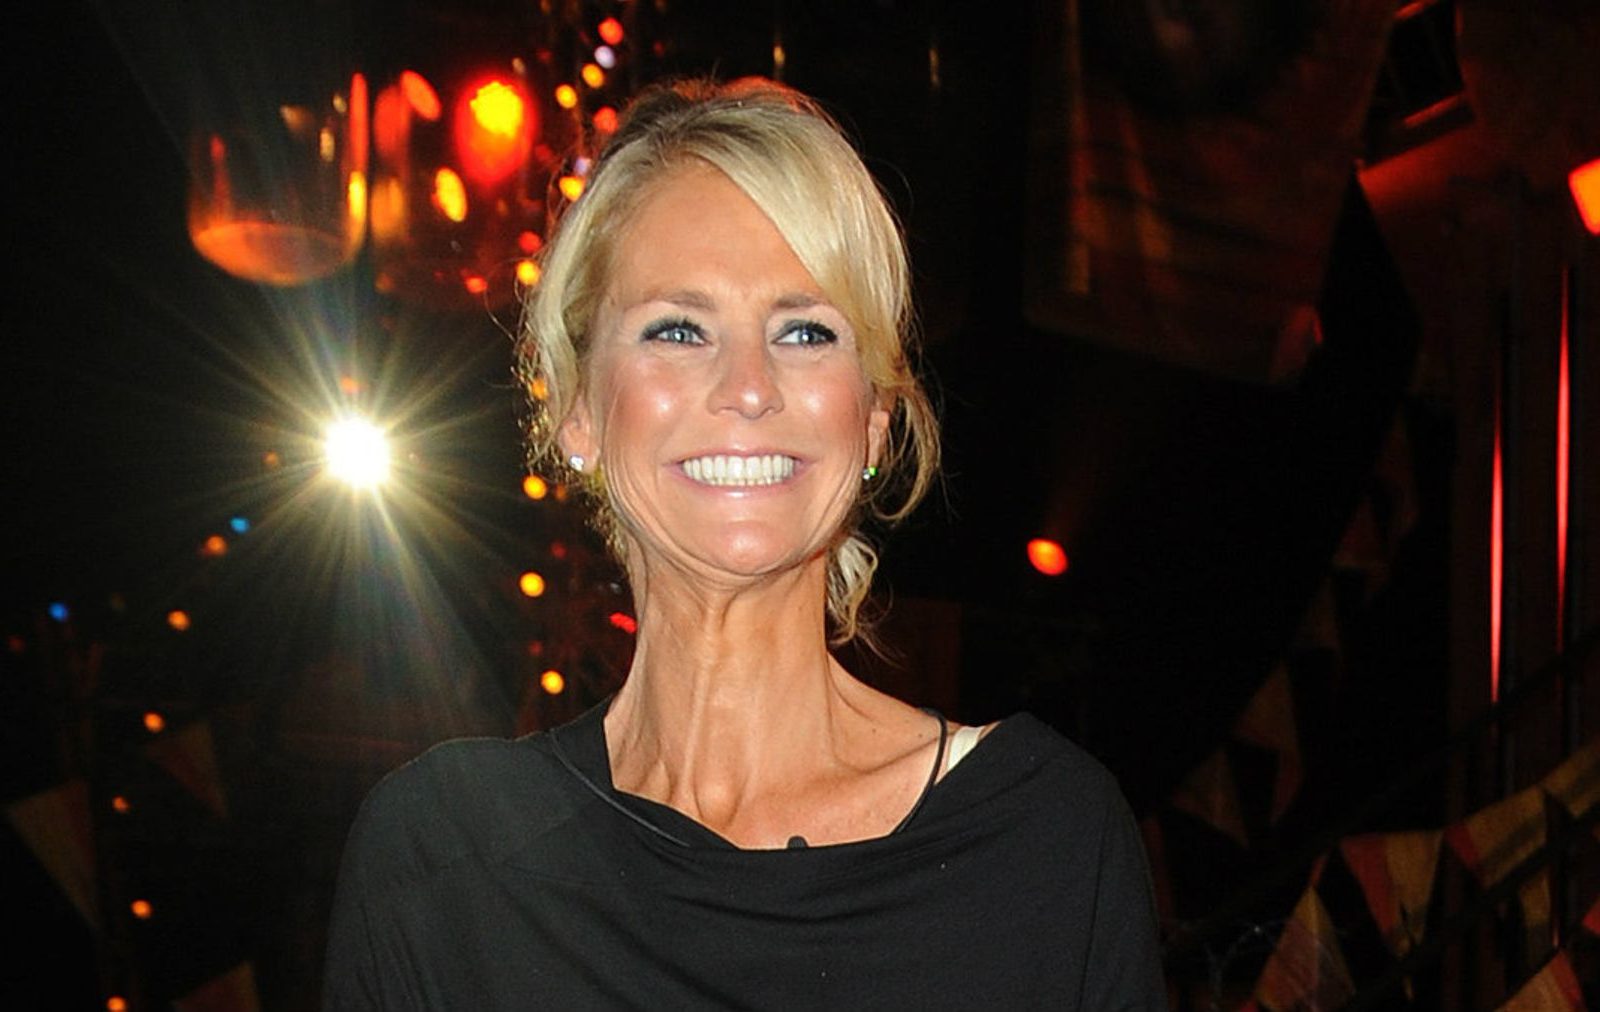 The matter of Ulrika Jonsson age has not affected her relevance